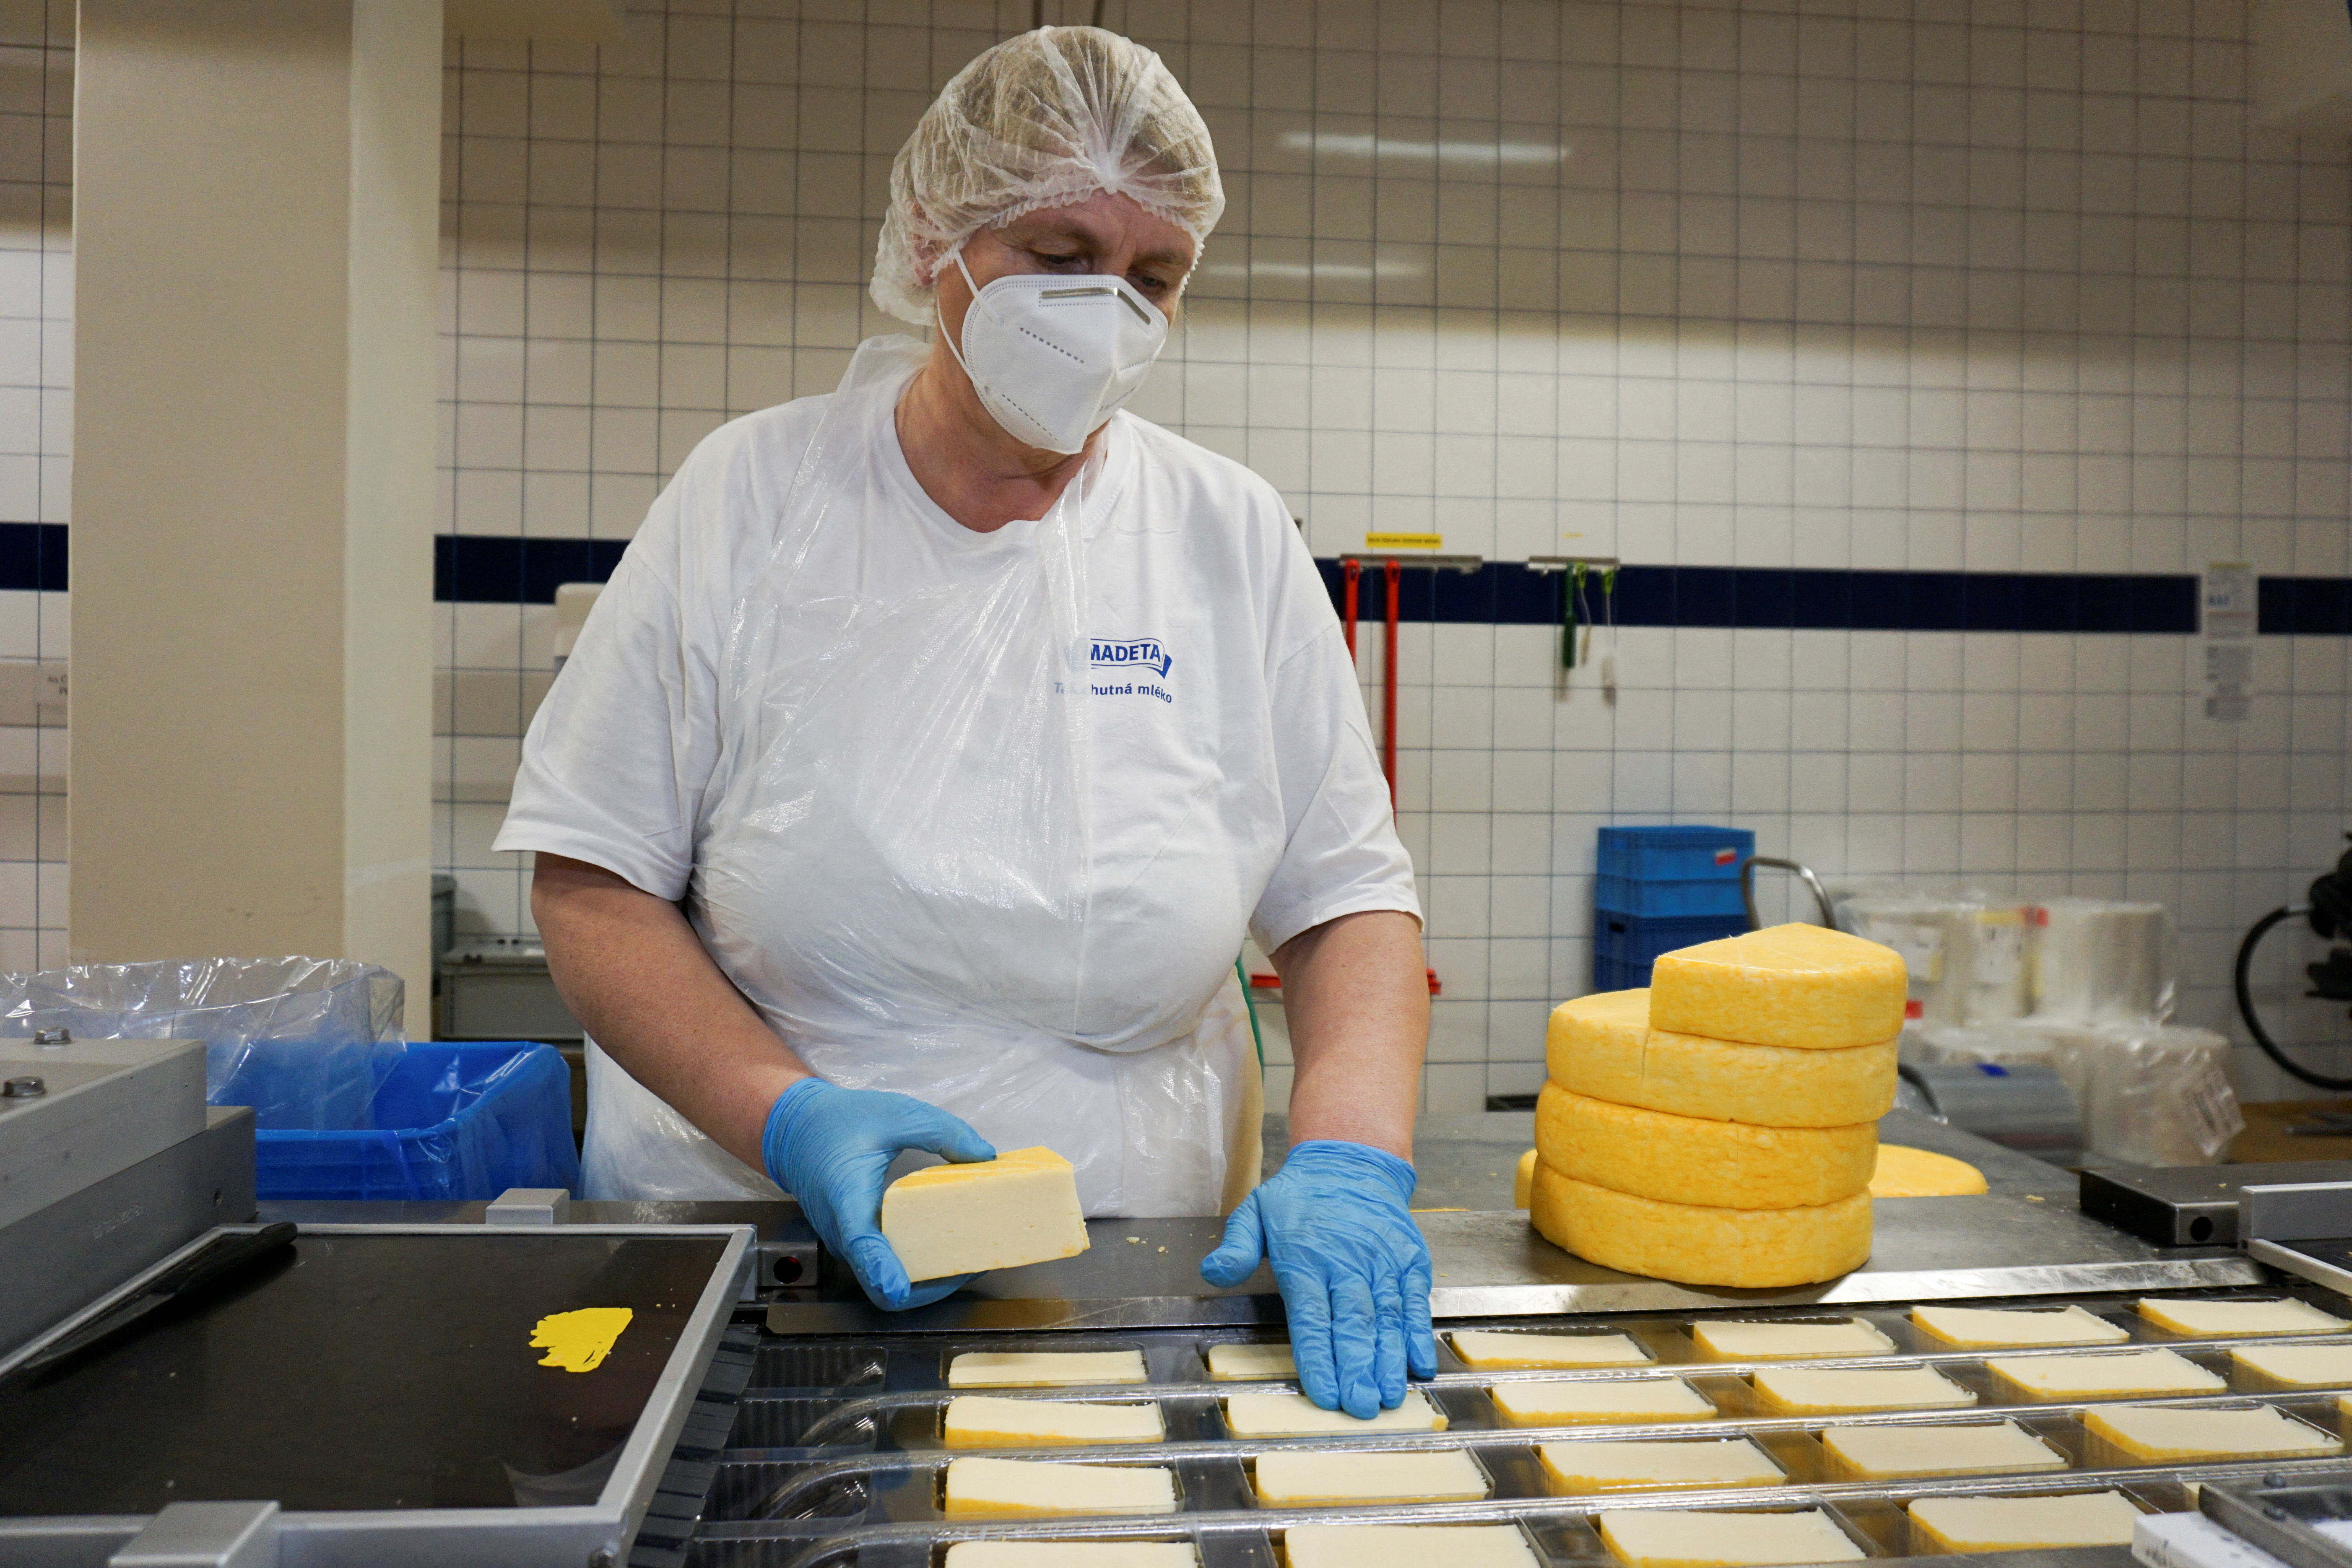 An employee works at Madeta dairy factory in Plana nad Luznici